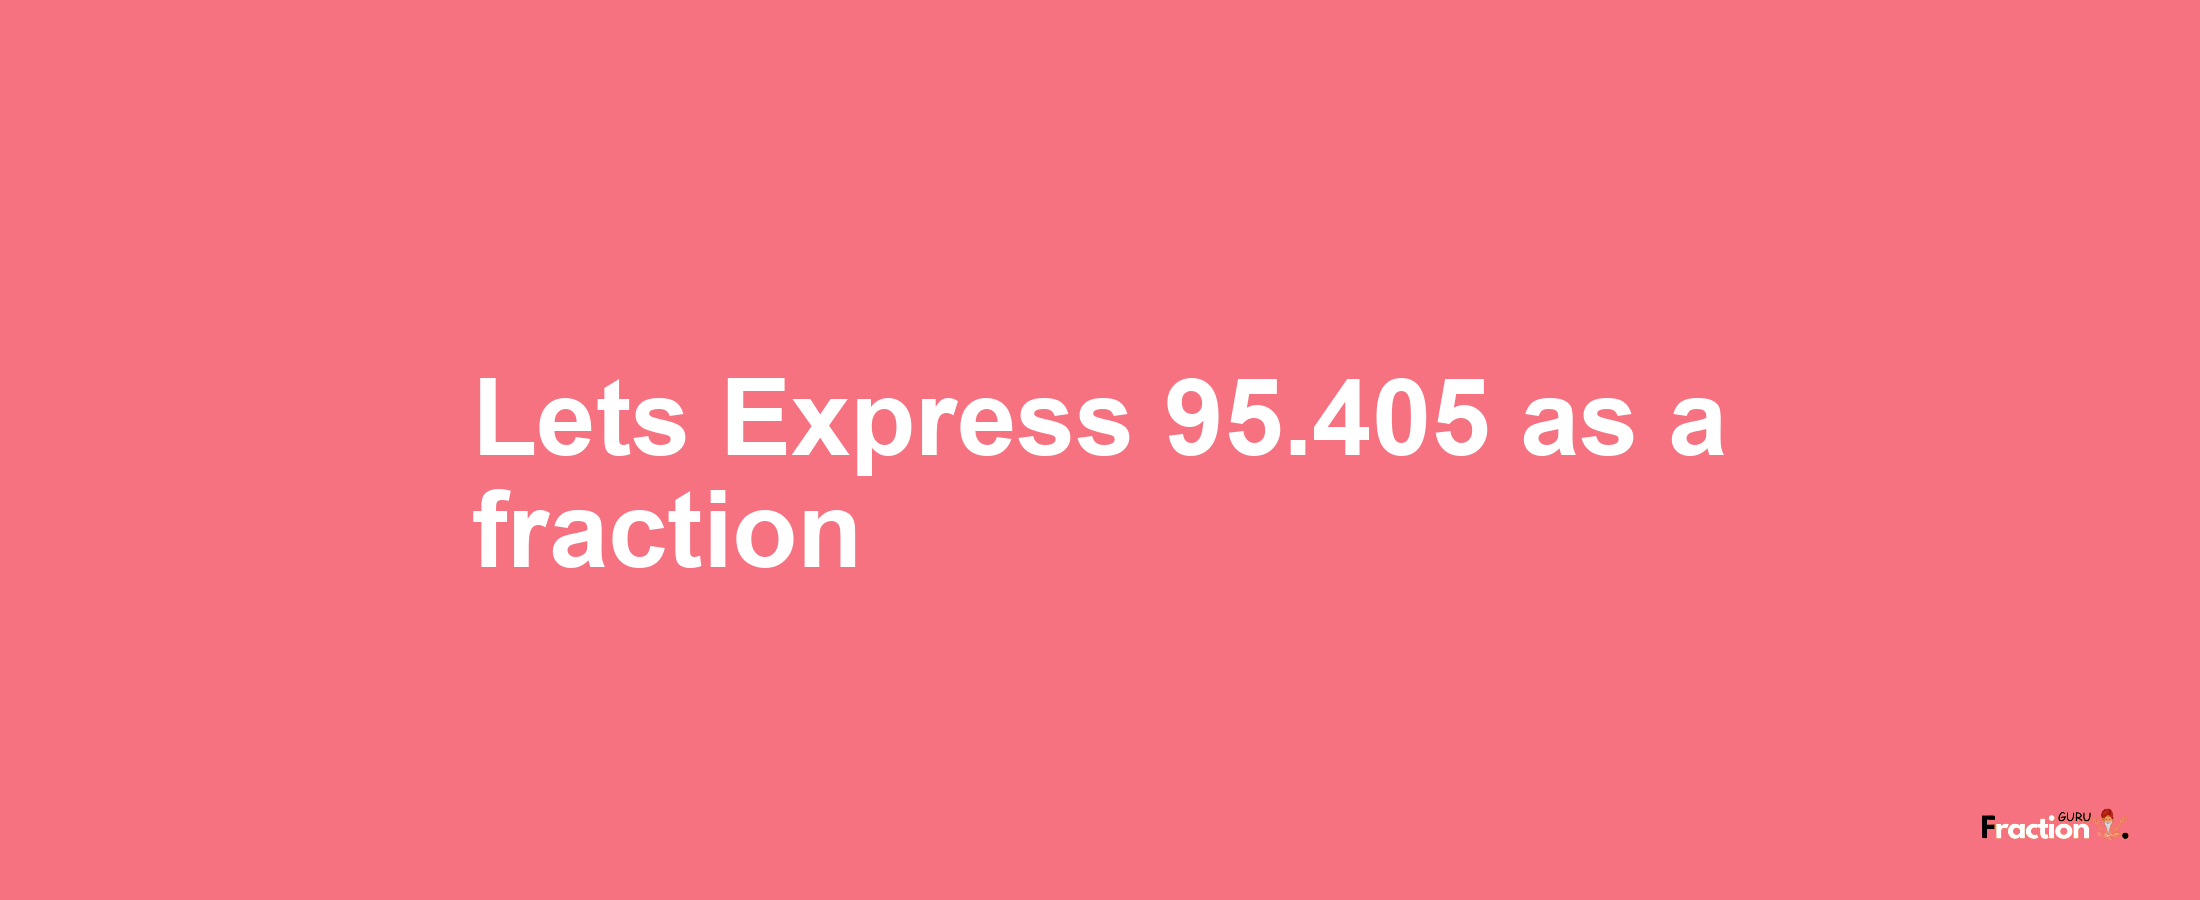 Lets Express 95.405 as afraction